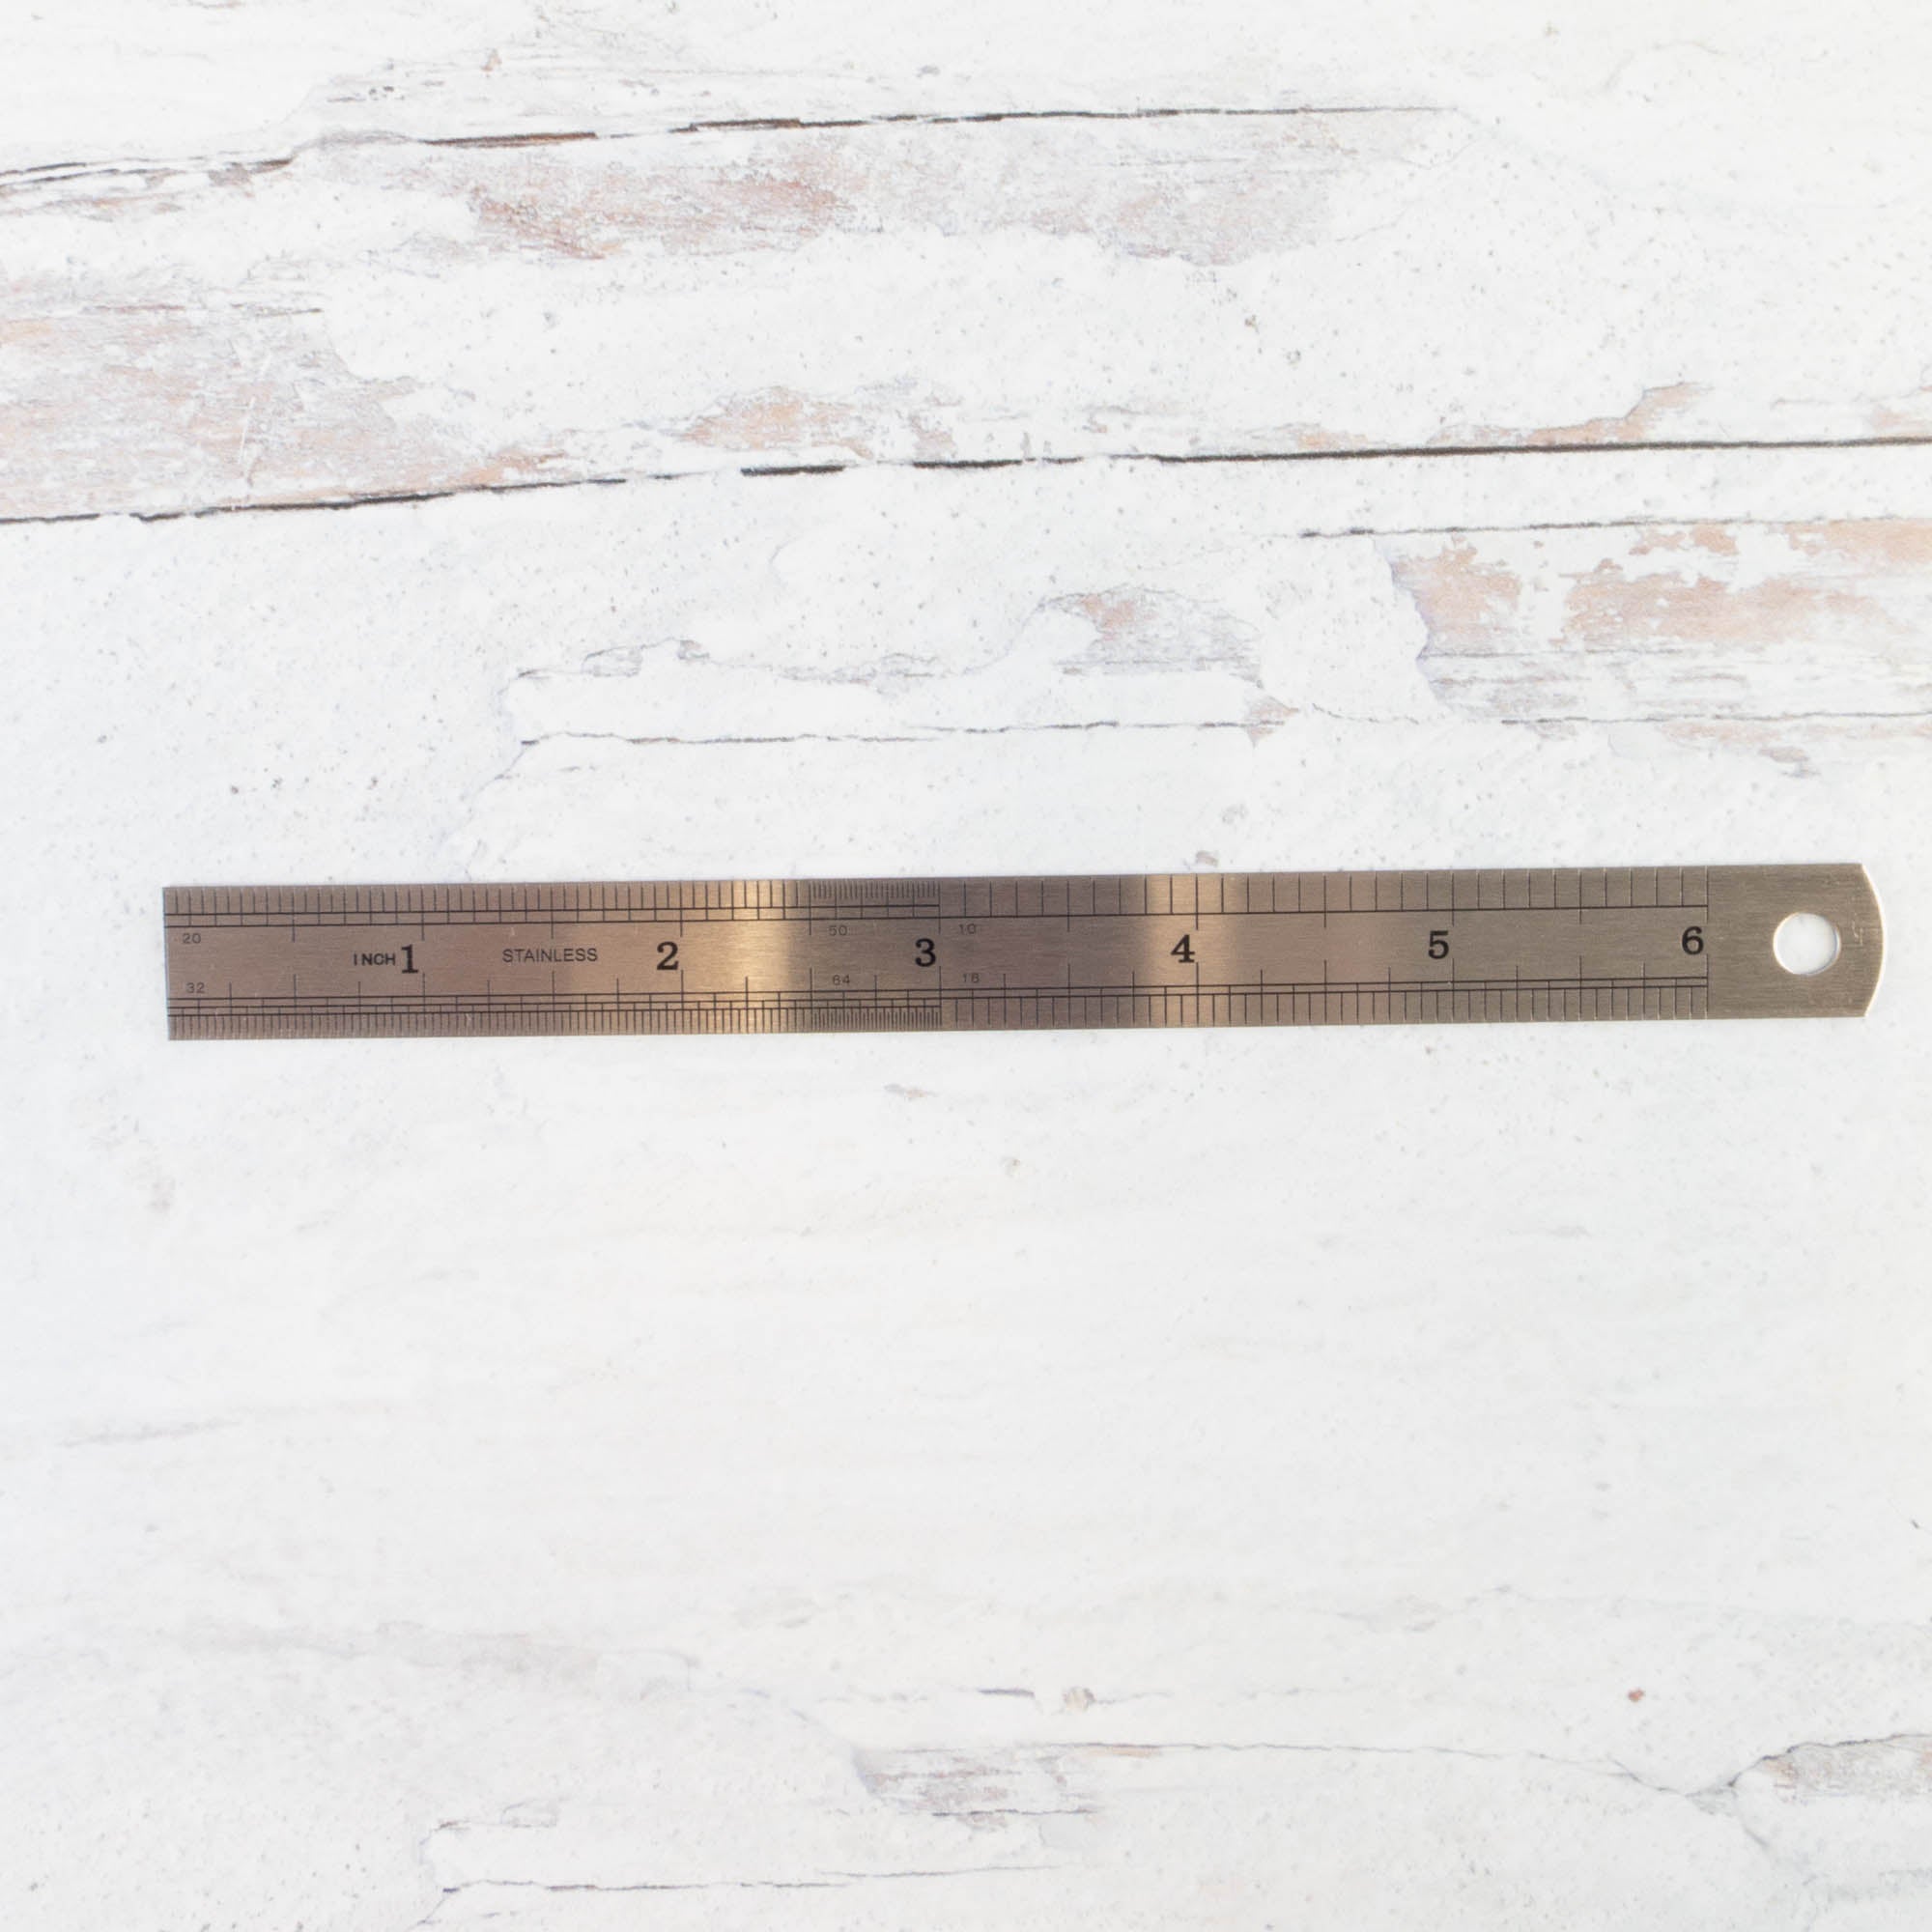 Metal Ruler 6 Inch Silver/Black from £1.12 - 601668Printed Promotional Metal  Ruler 6 Inch Silver/Black from £1.12 - 601668 - Lowest Cost by Cherrything